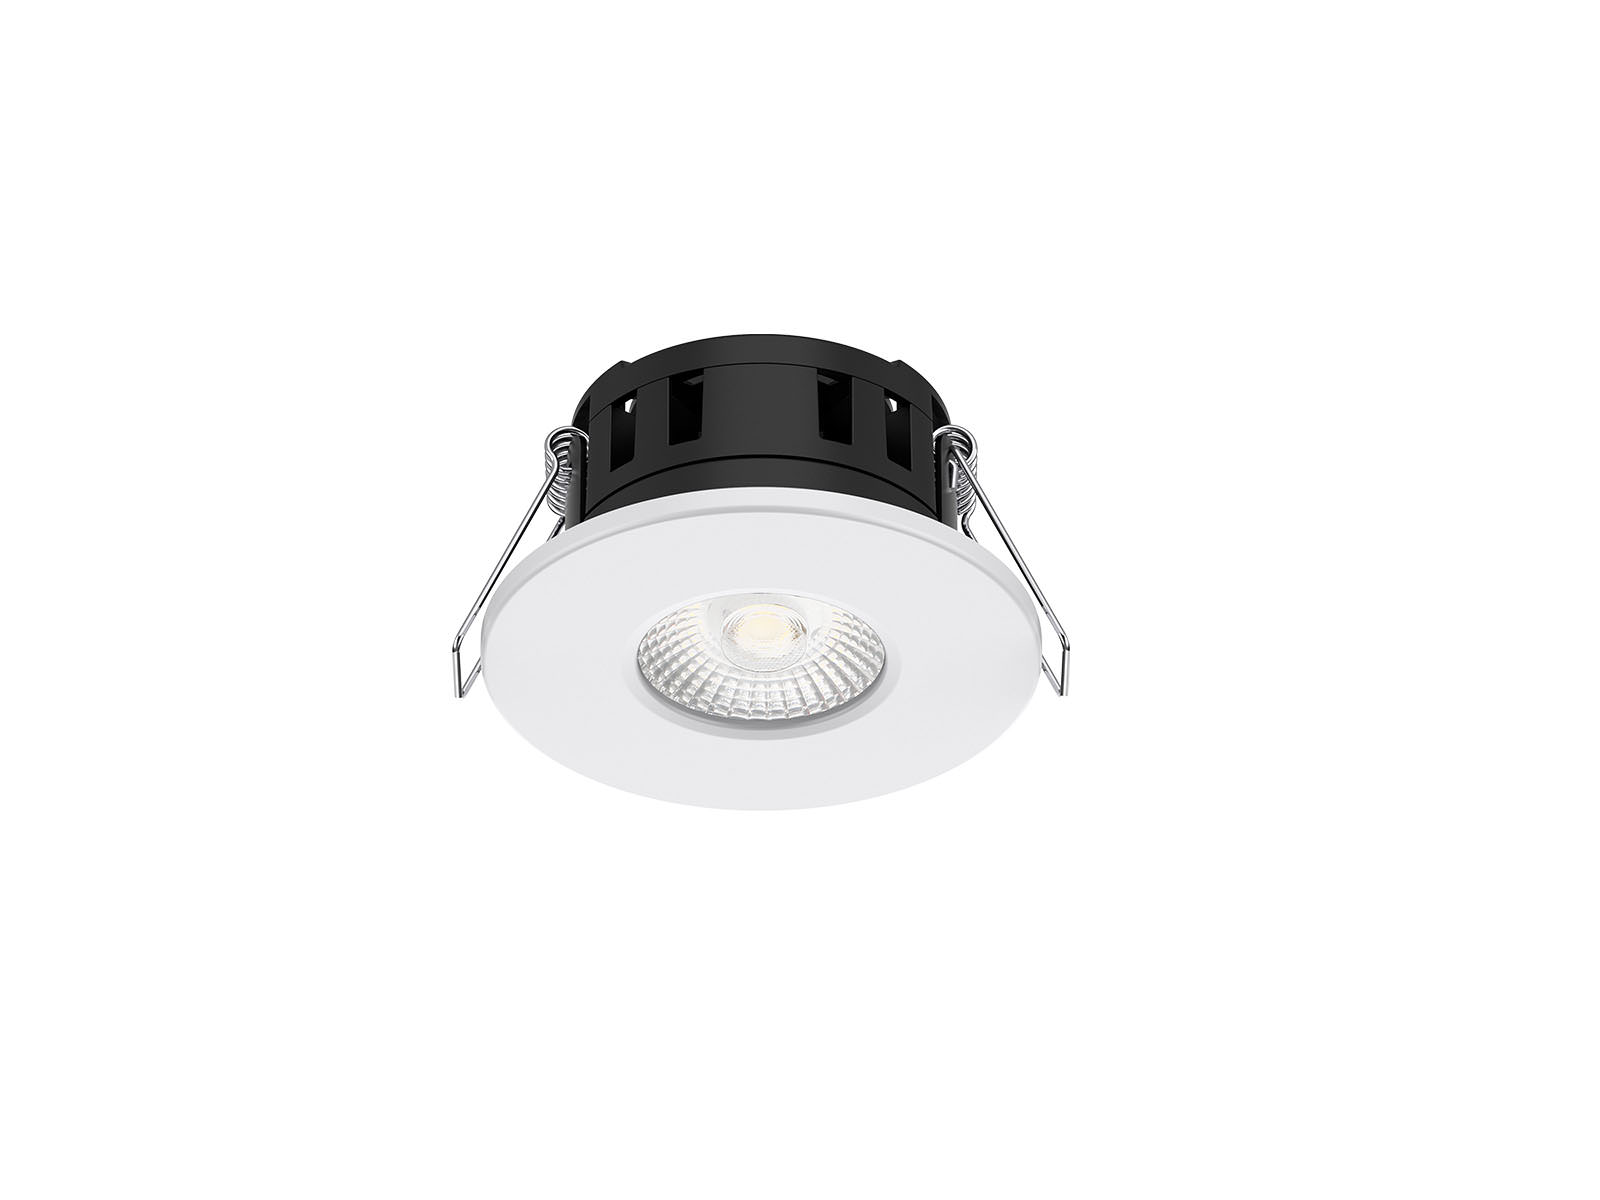 DL333 LED Downlight With Good Heat Dissipation Performance